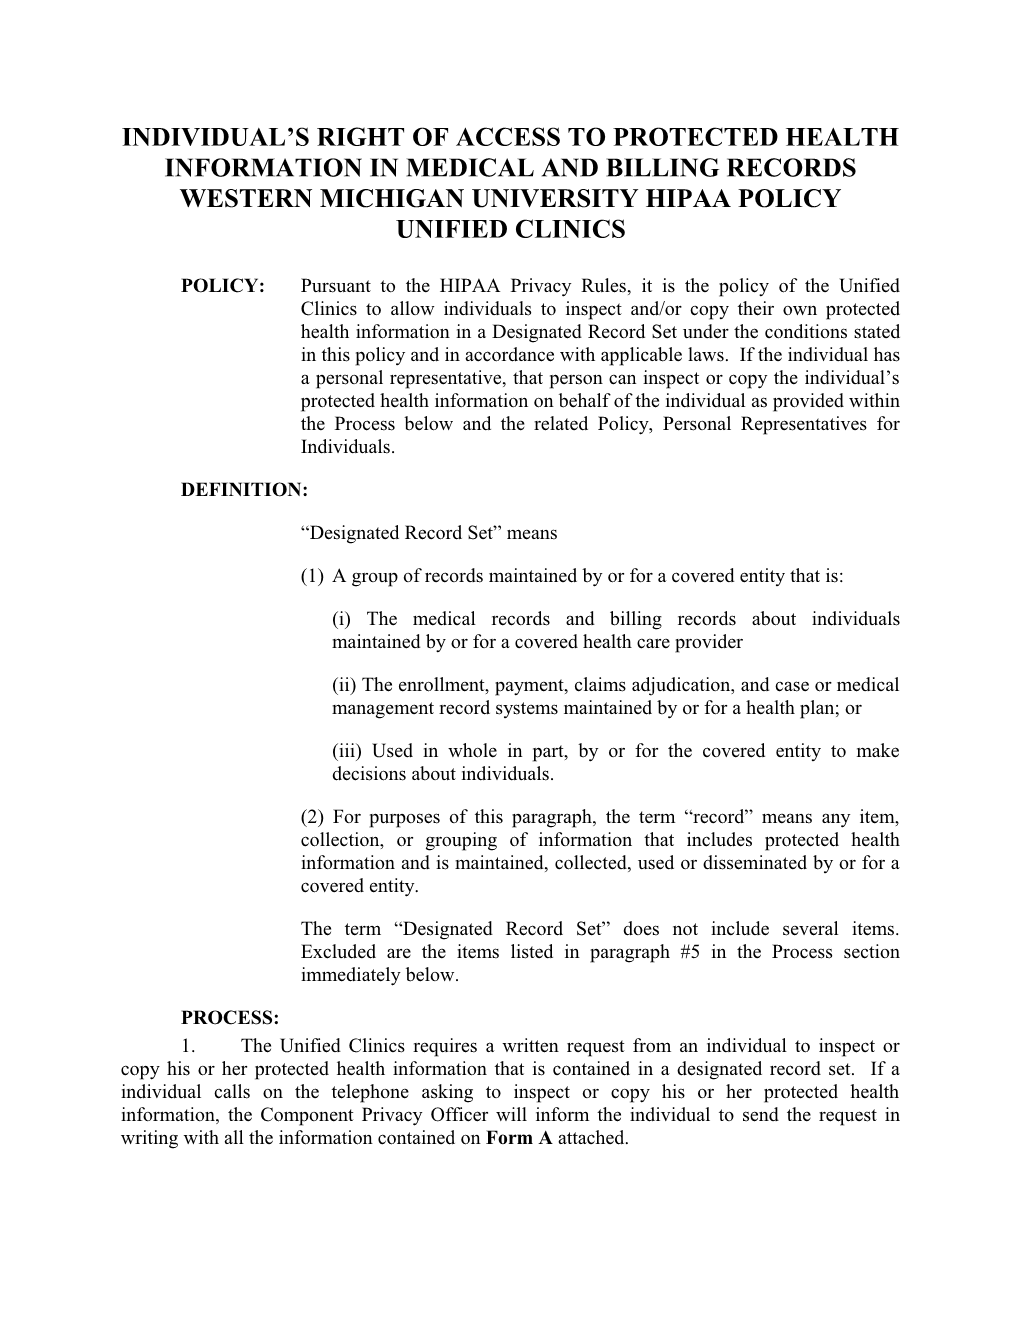 Western Michigan University Hipaa Policy Regarding Disclosures of Protected Health Information